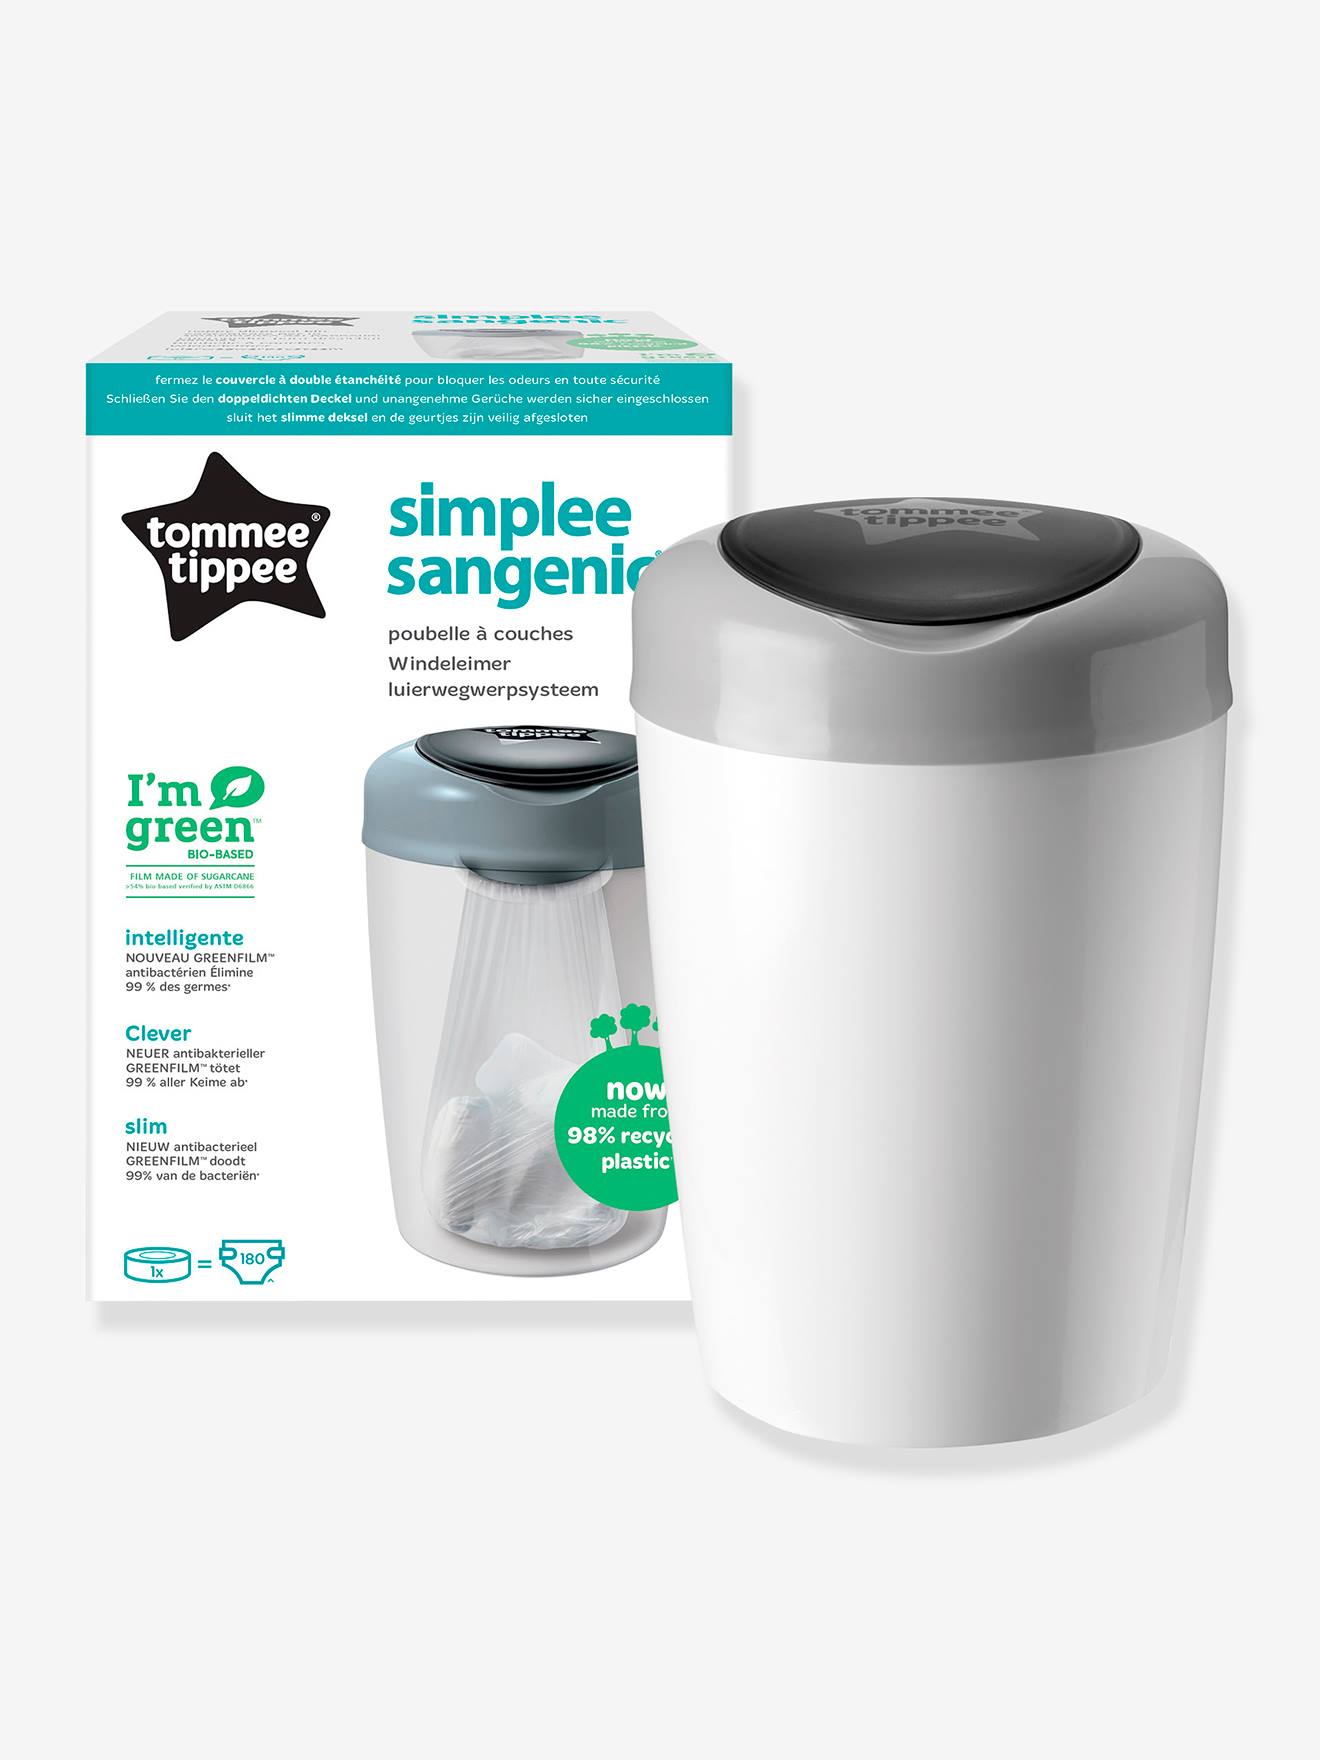 Poubelle à couches Tomme Tippee Sangenic - Tommee Tippee